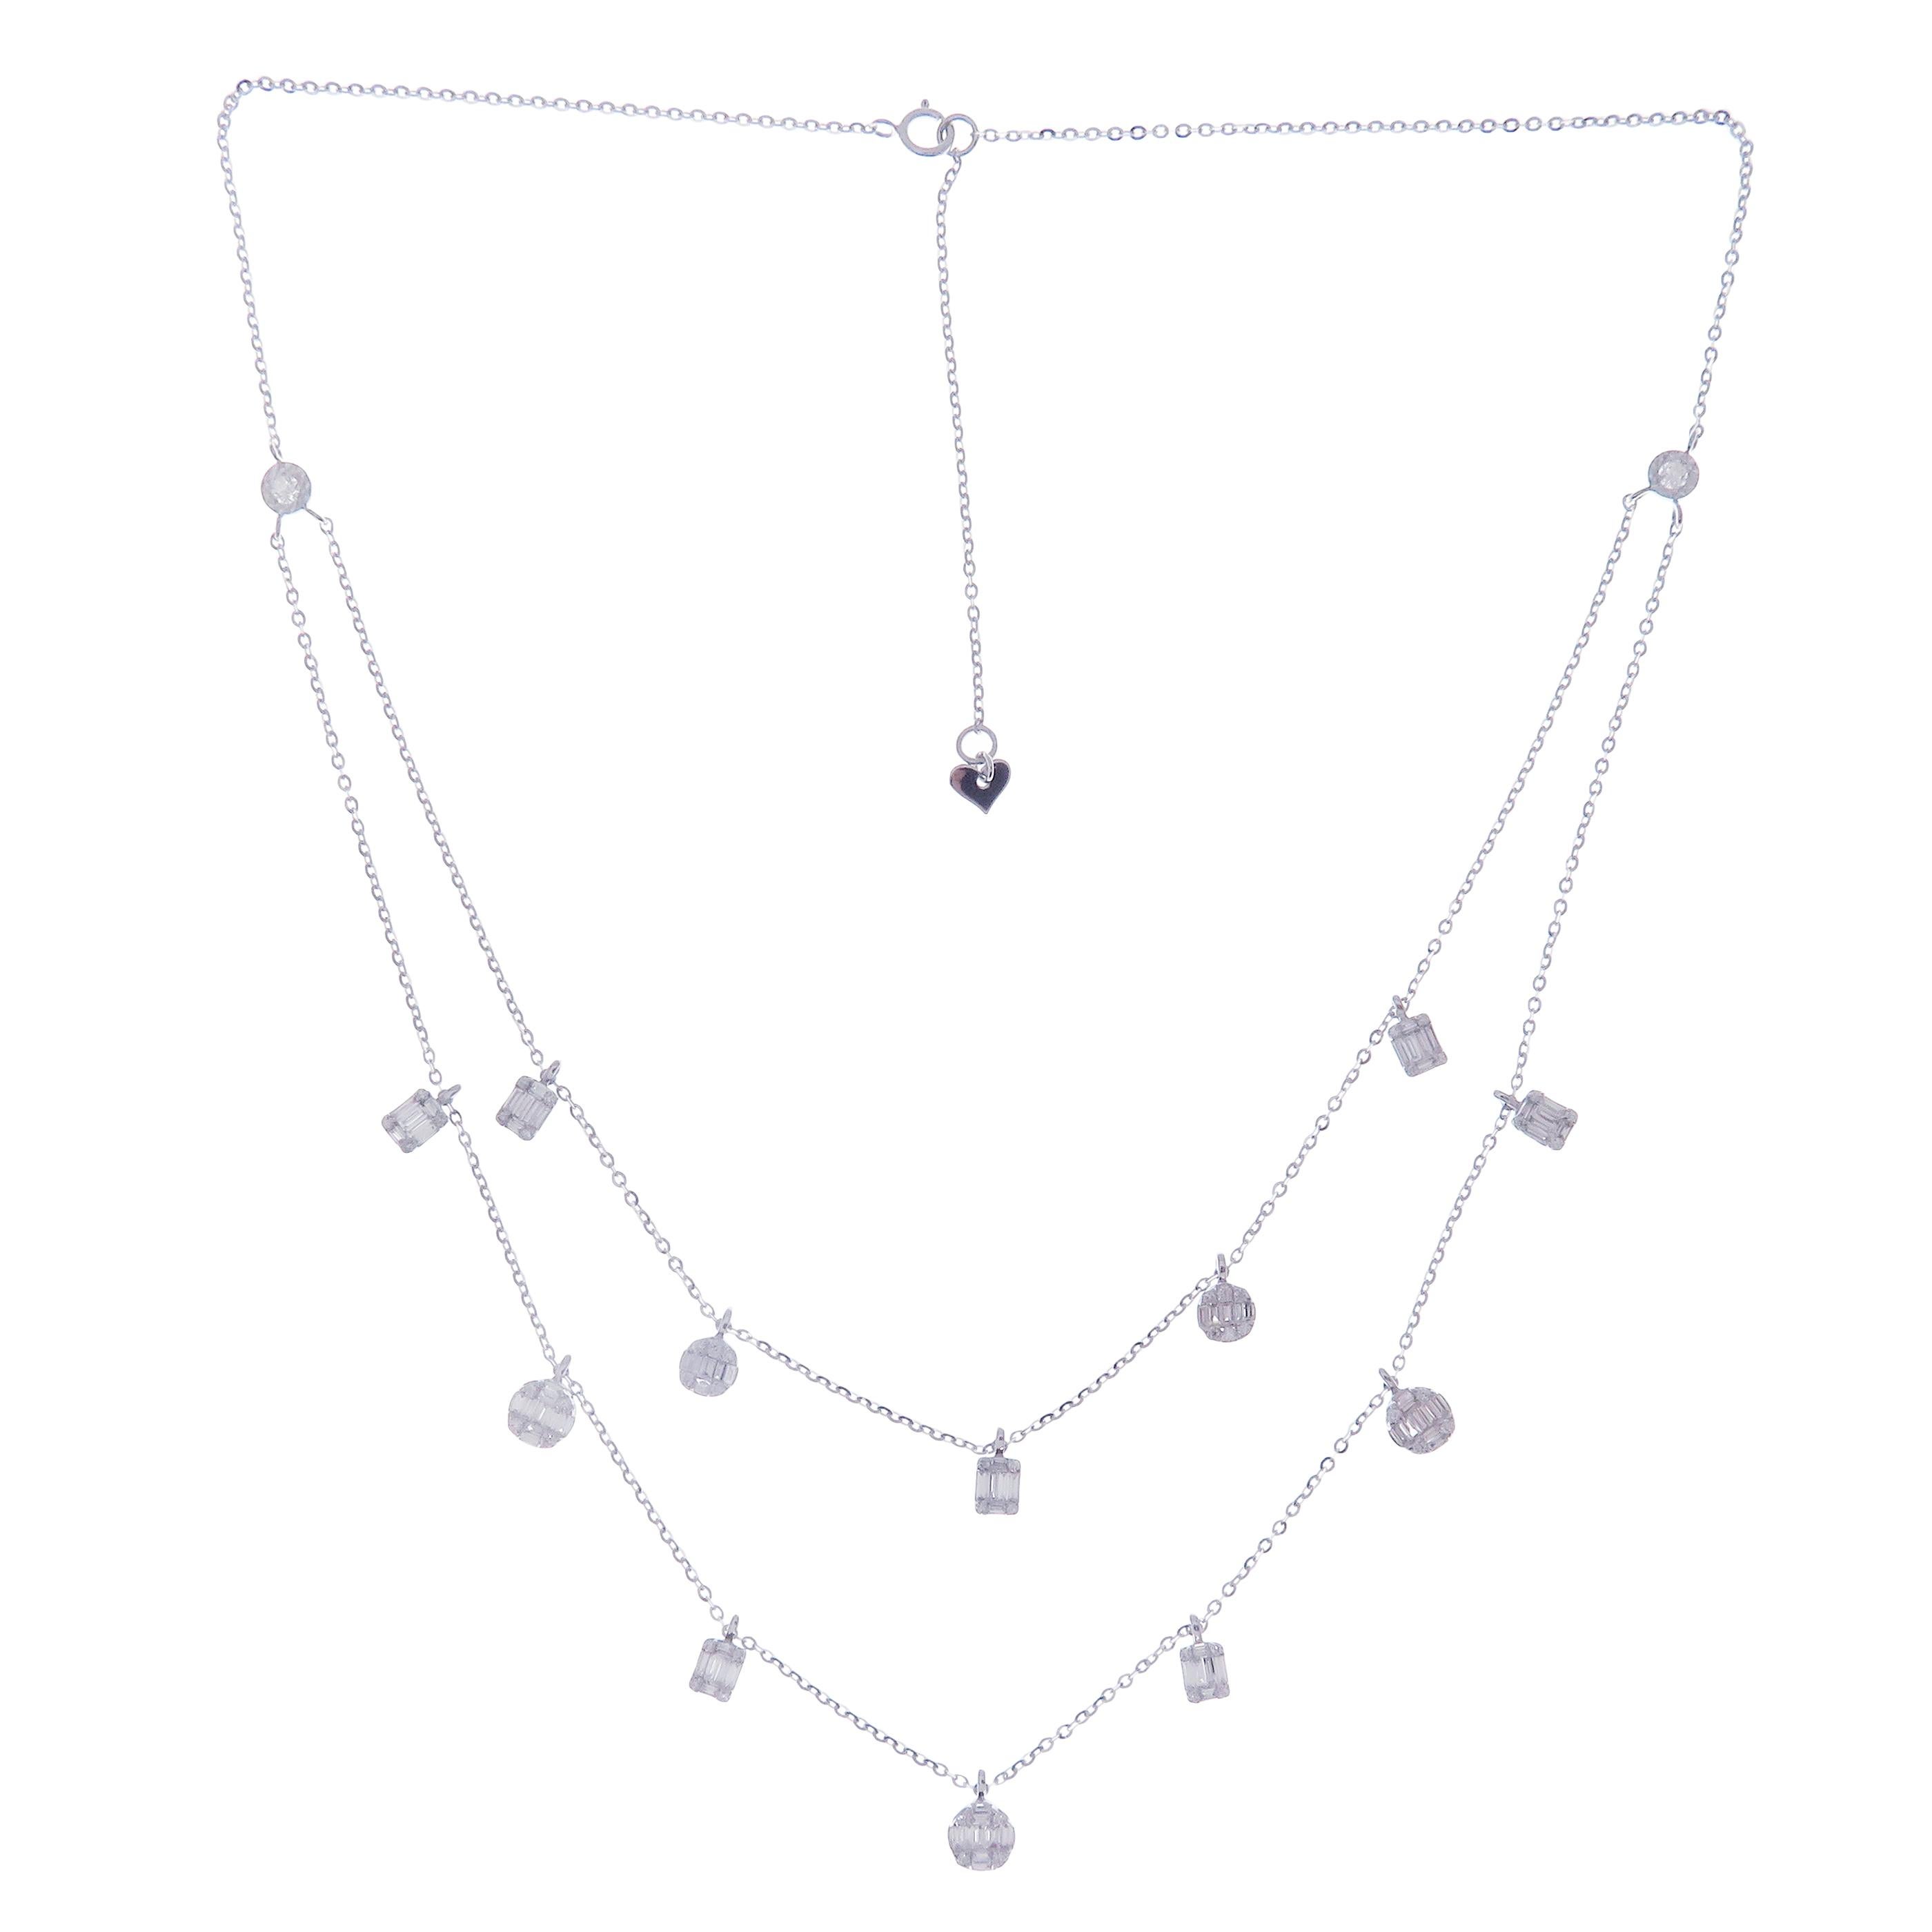 This delicate double-strand necklace is crafted in 18-karat white gold, weighing approximately 1.35 total carats of SI-H Quality white diamonds. 
18-karat yellow gold and rose gold are also available upon request.

Necklace is 16